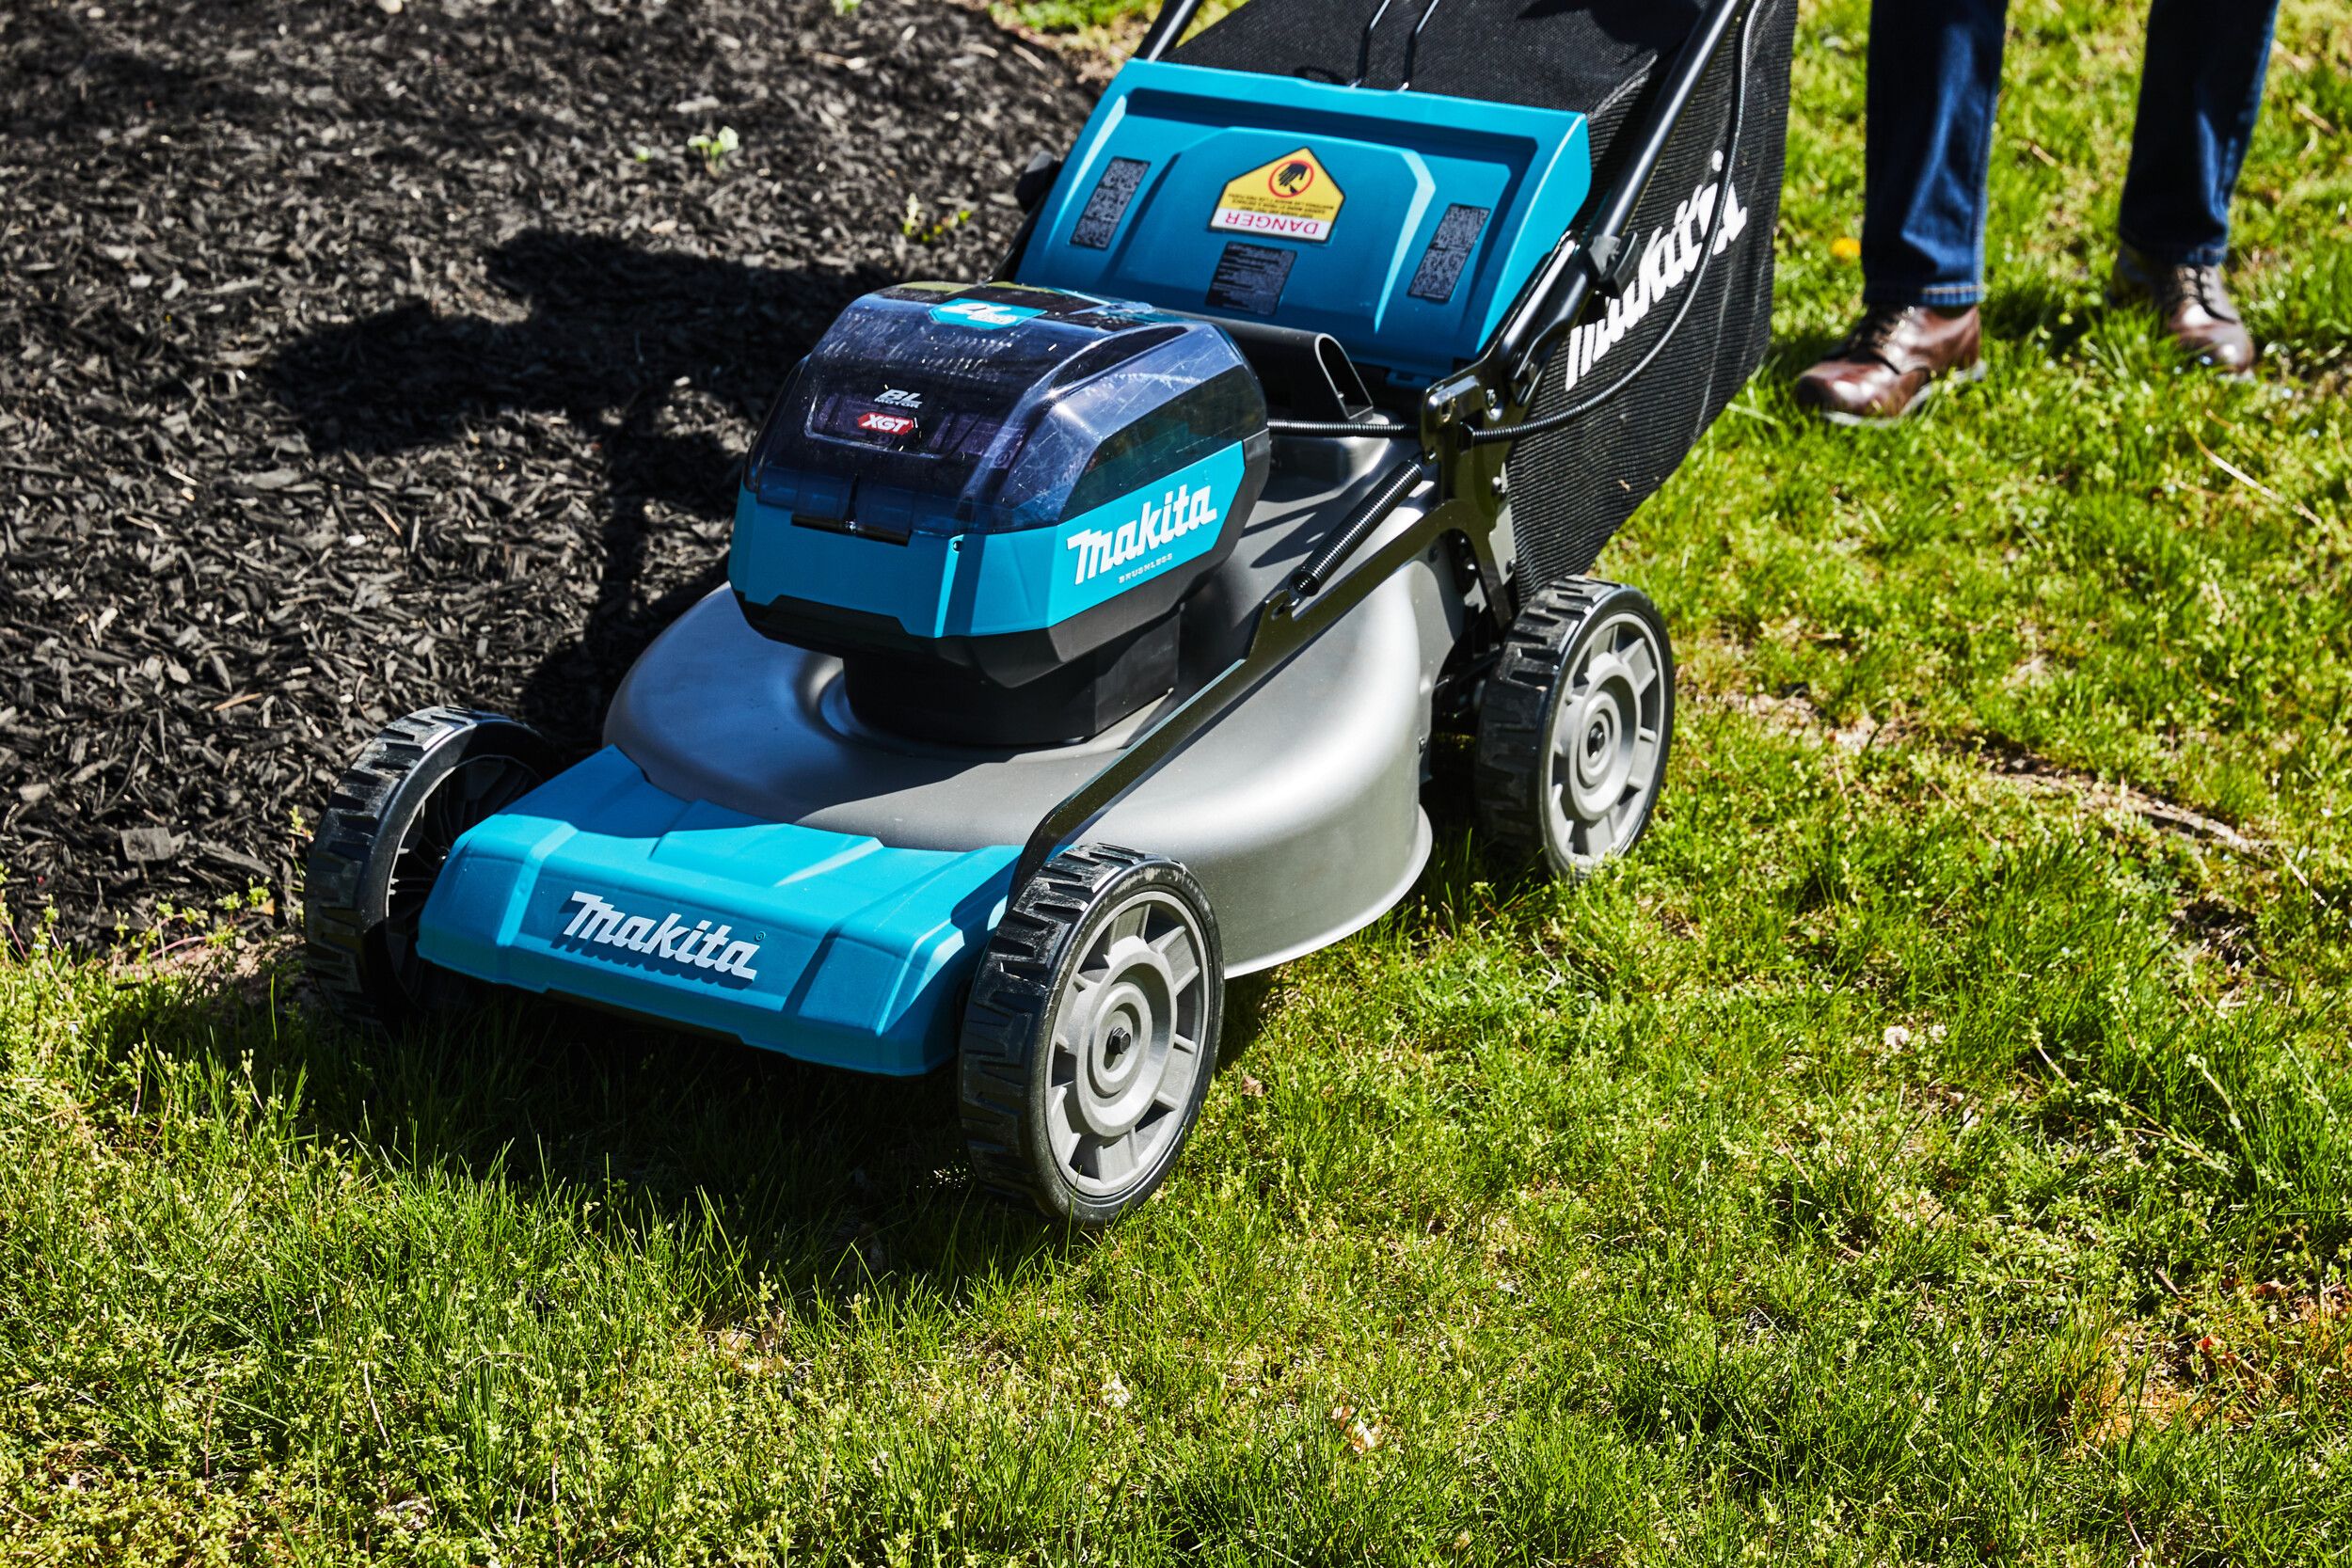 Image of Self-propelled electric garden edger with variable speed control